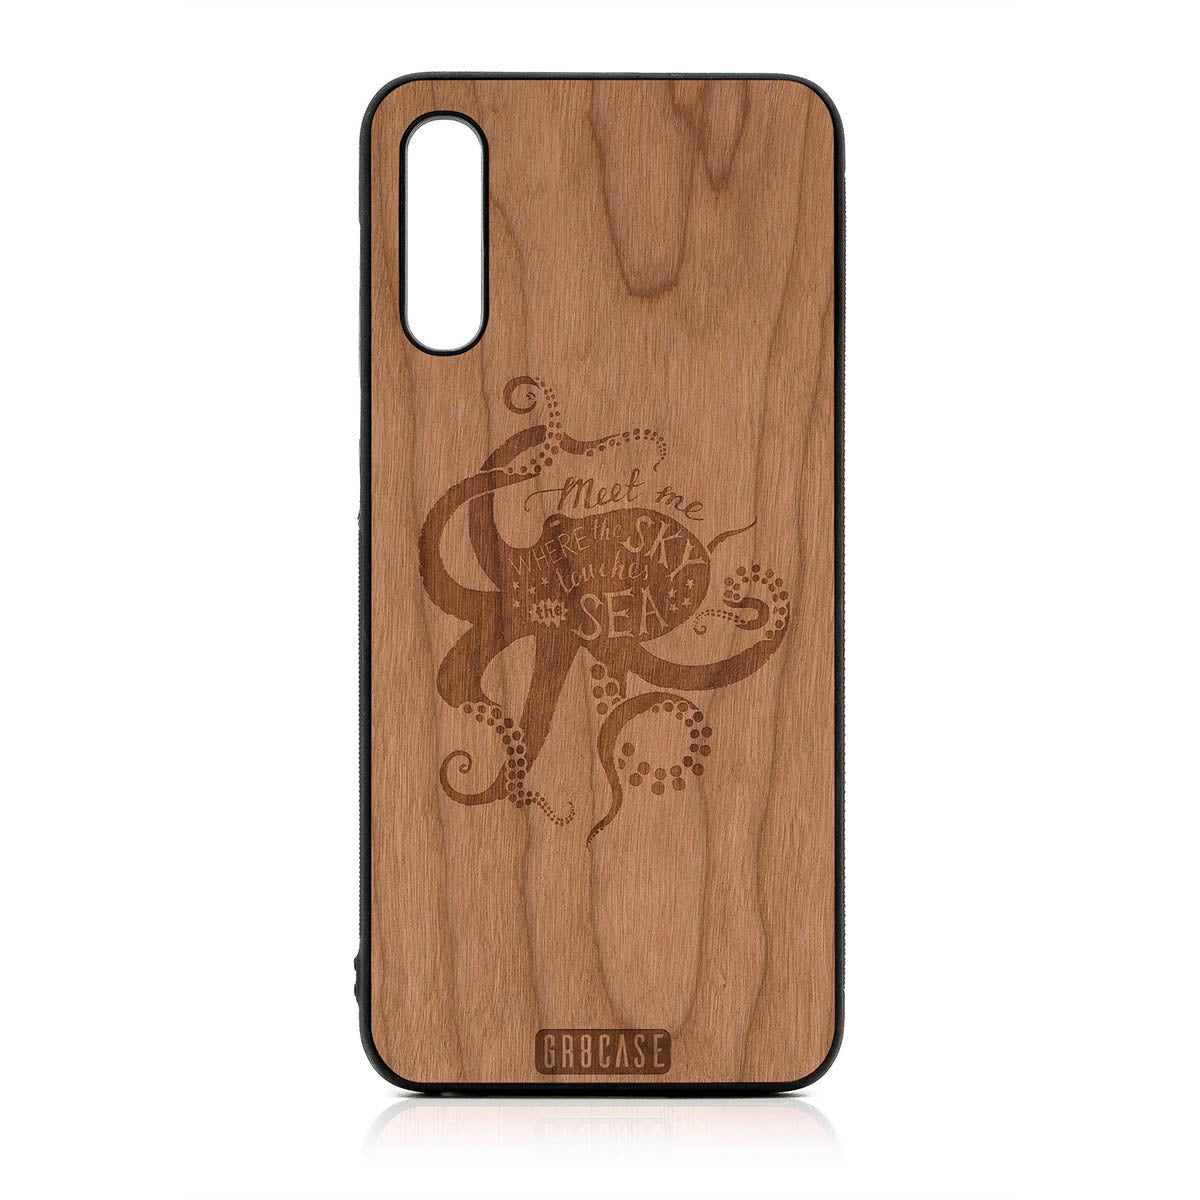 Meet Me Where The Sky Touches The Sea (Octopus) Design Wood Case For Samsung Galaxy A50